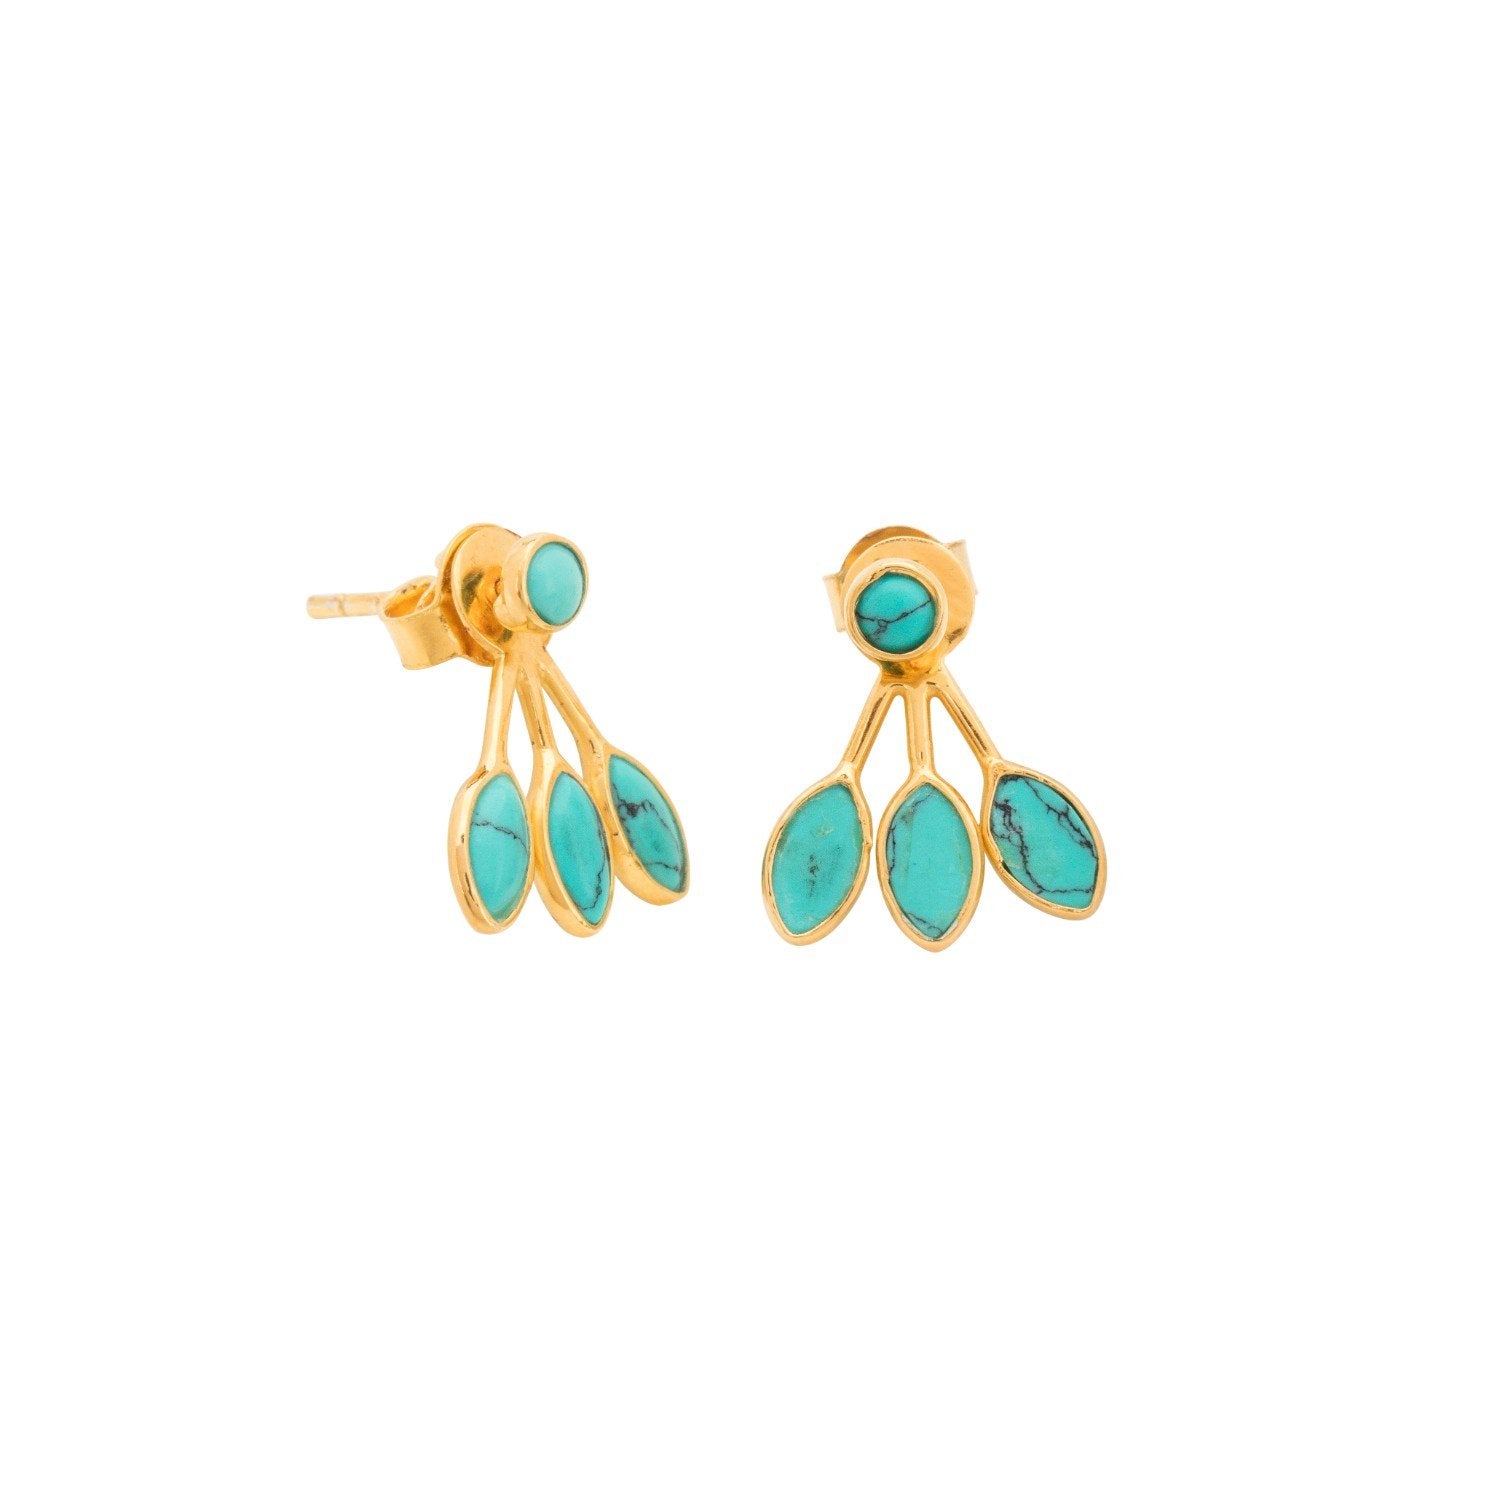 Bo Riviere 3 Pierres Turquoise -